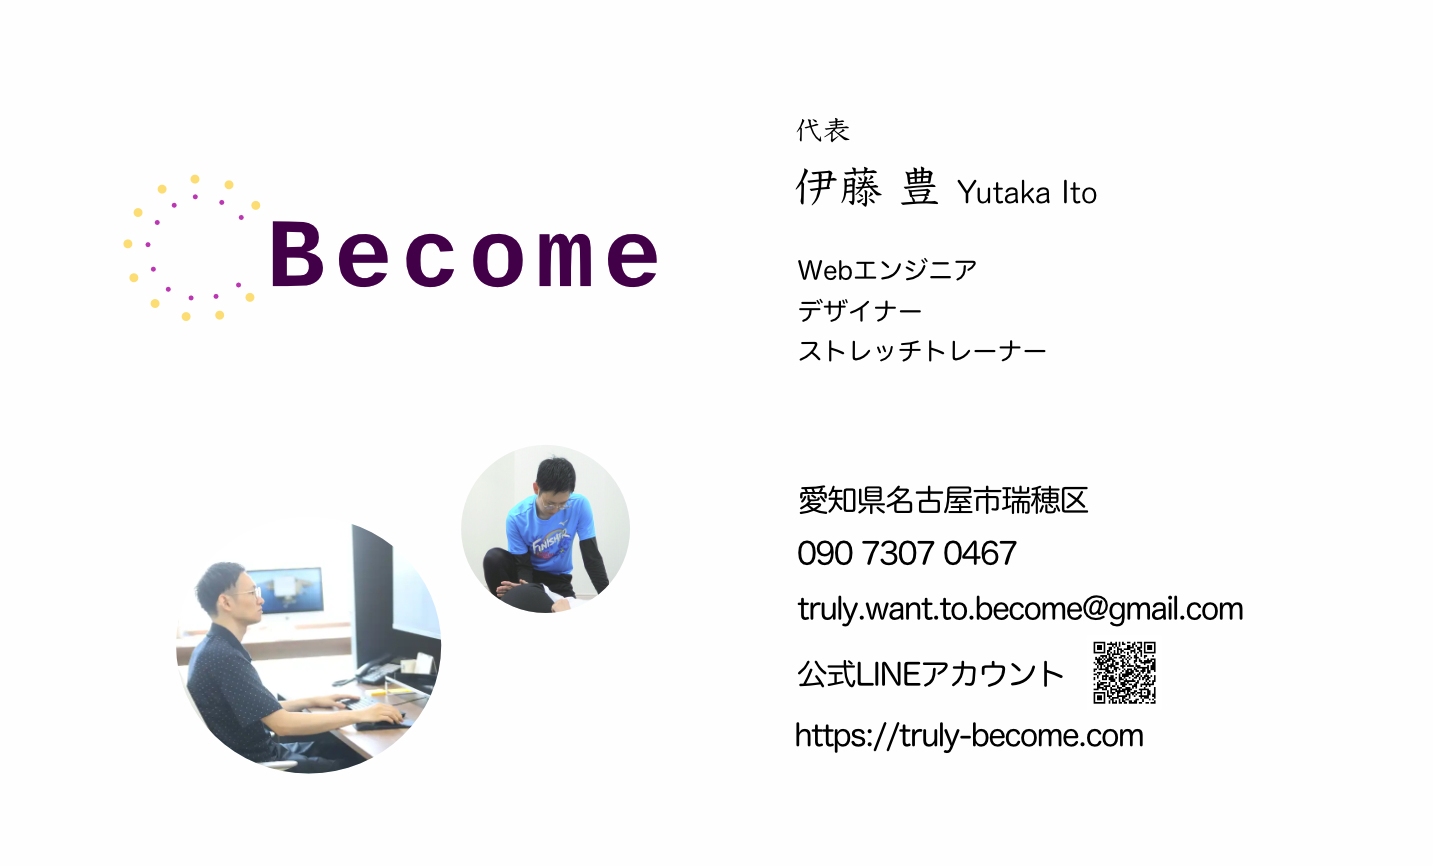 Become 代表　伊藤 豊 Yutaka Ito Webエンジニア デザイナー ストレッチトレーナー 愛知県名古屋市瑞穂区 truly.want.to.become@gmail.com 